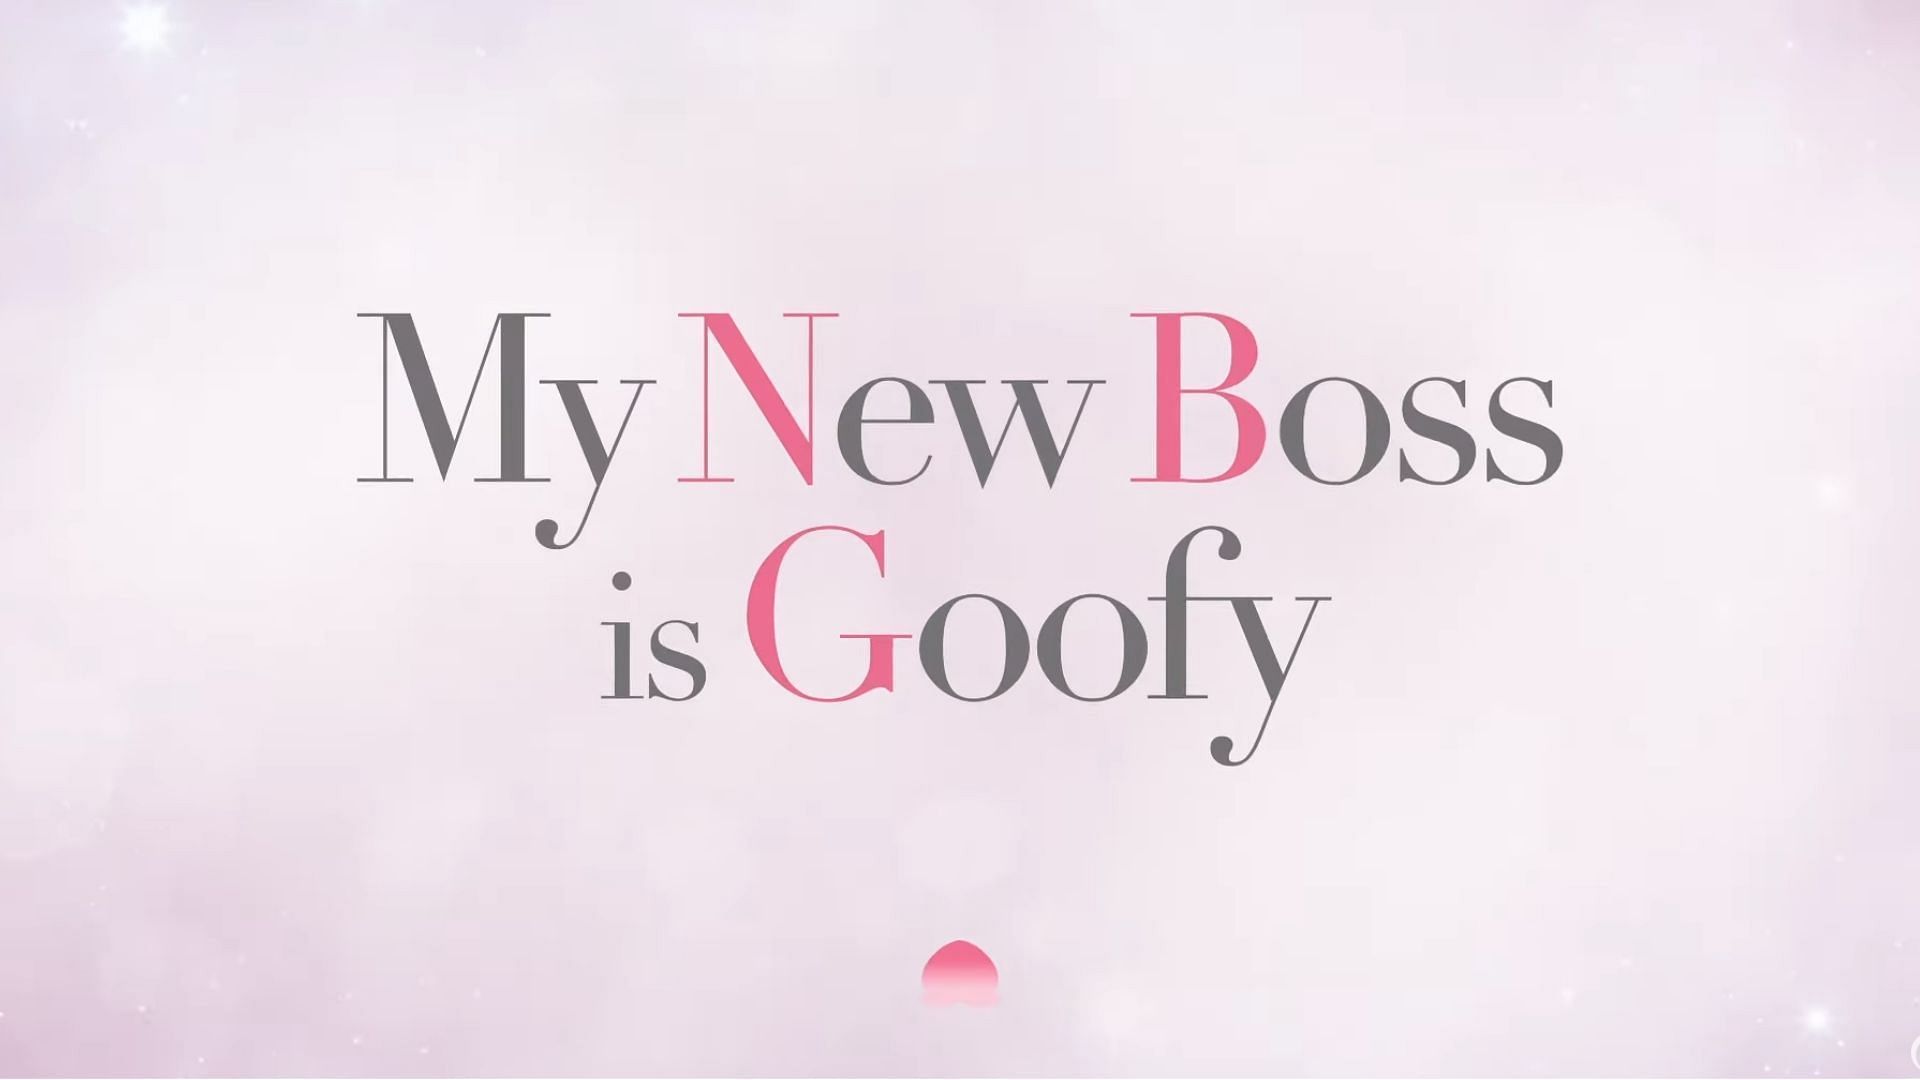 My New Boss Is Goofy (Image via A-1 Pictures)